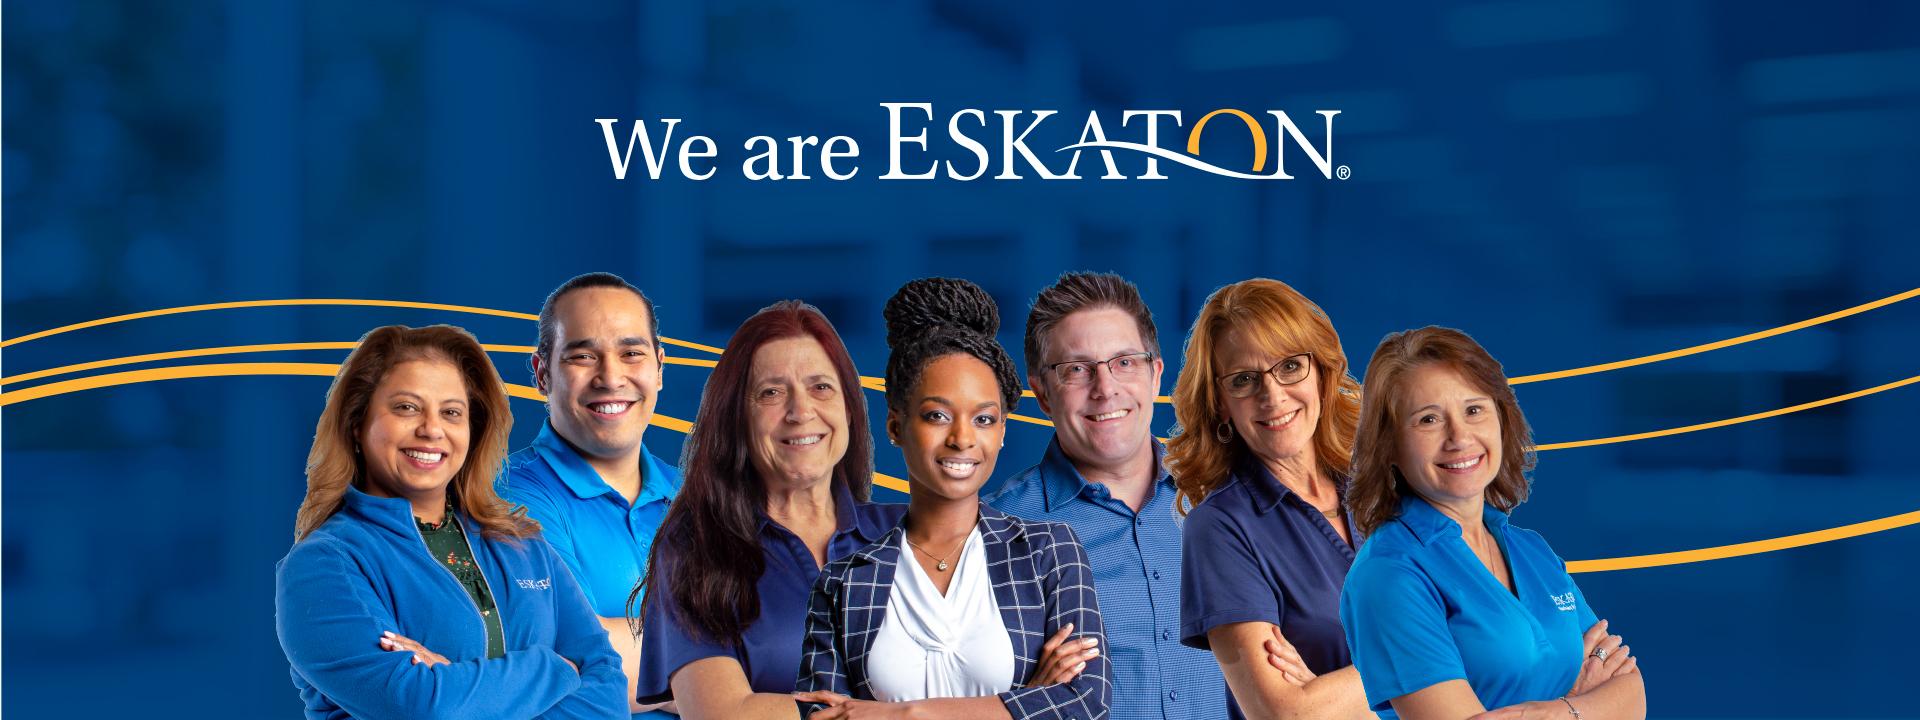 We are ESKATON banner with seven employees